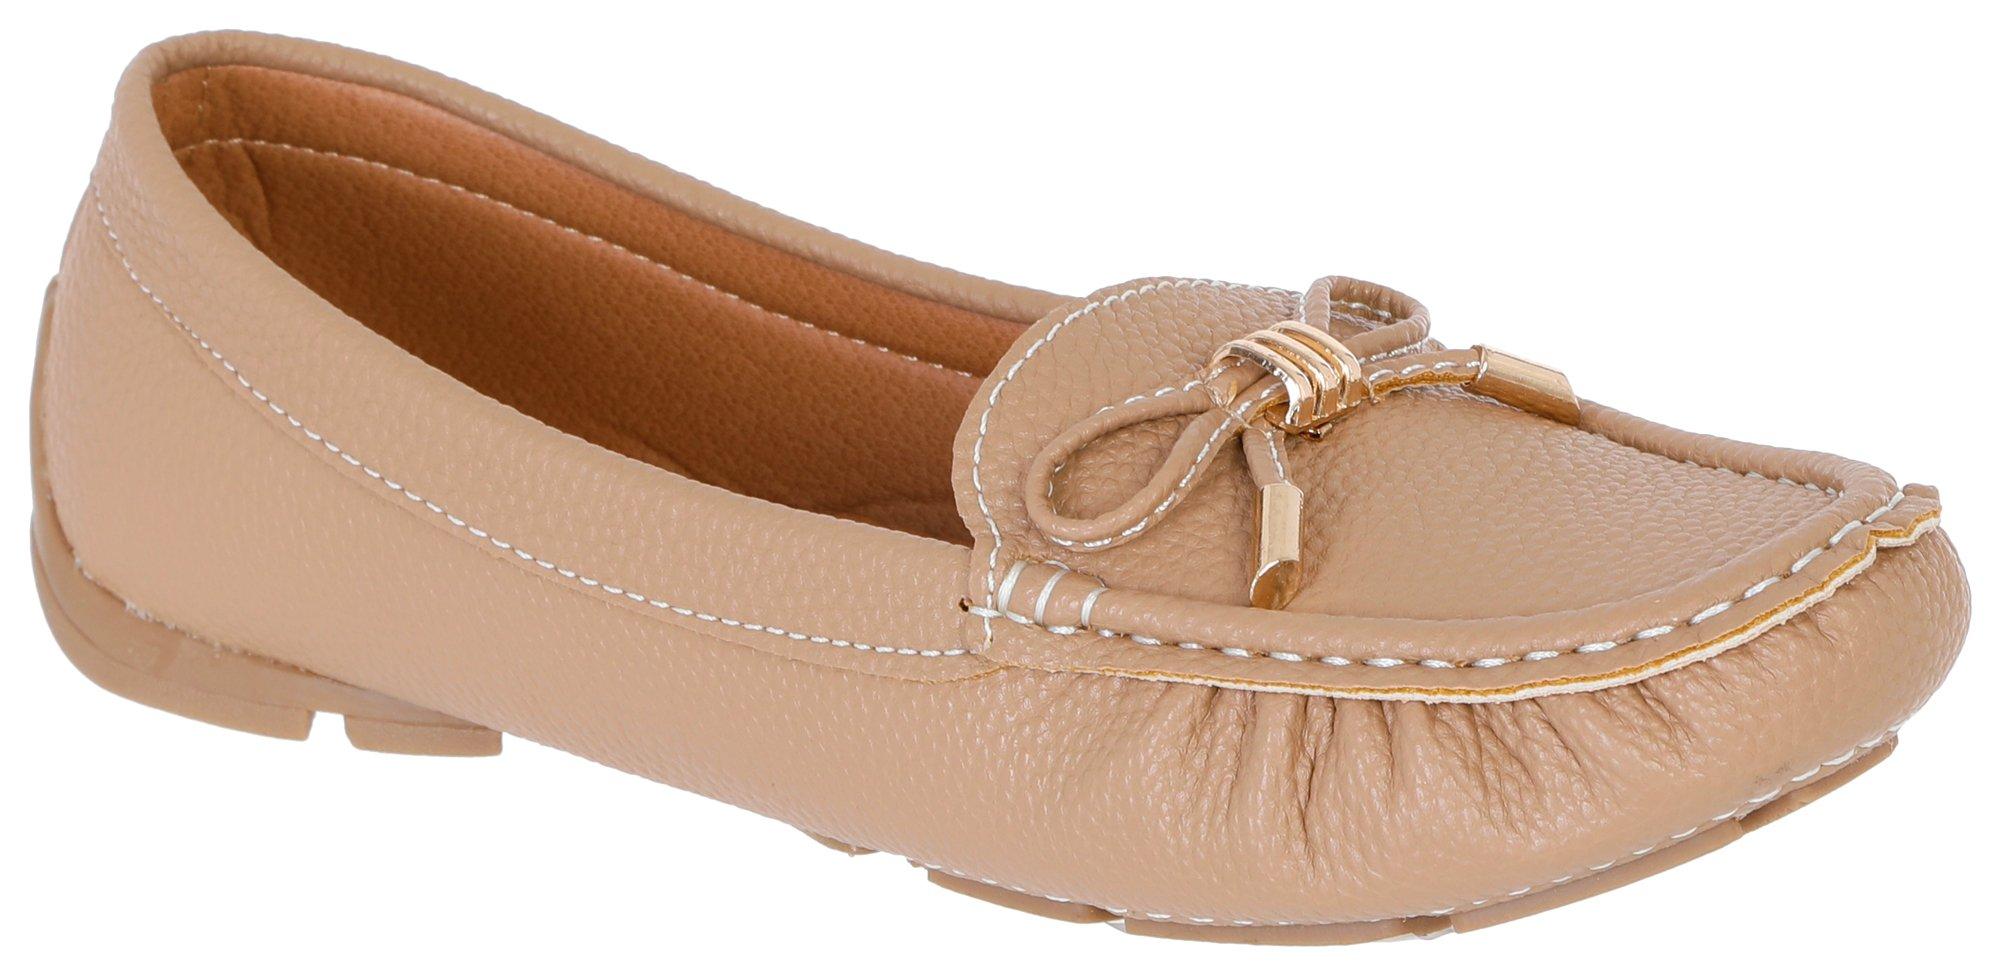 Women's Pebbled Faux Leather Bow Moccasins